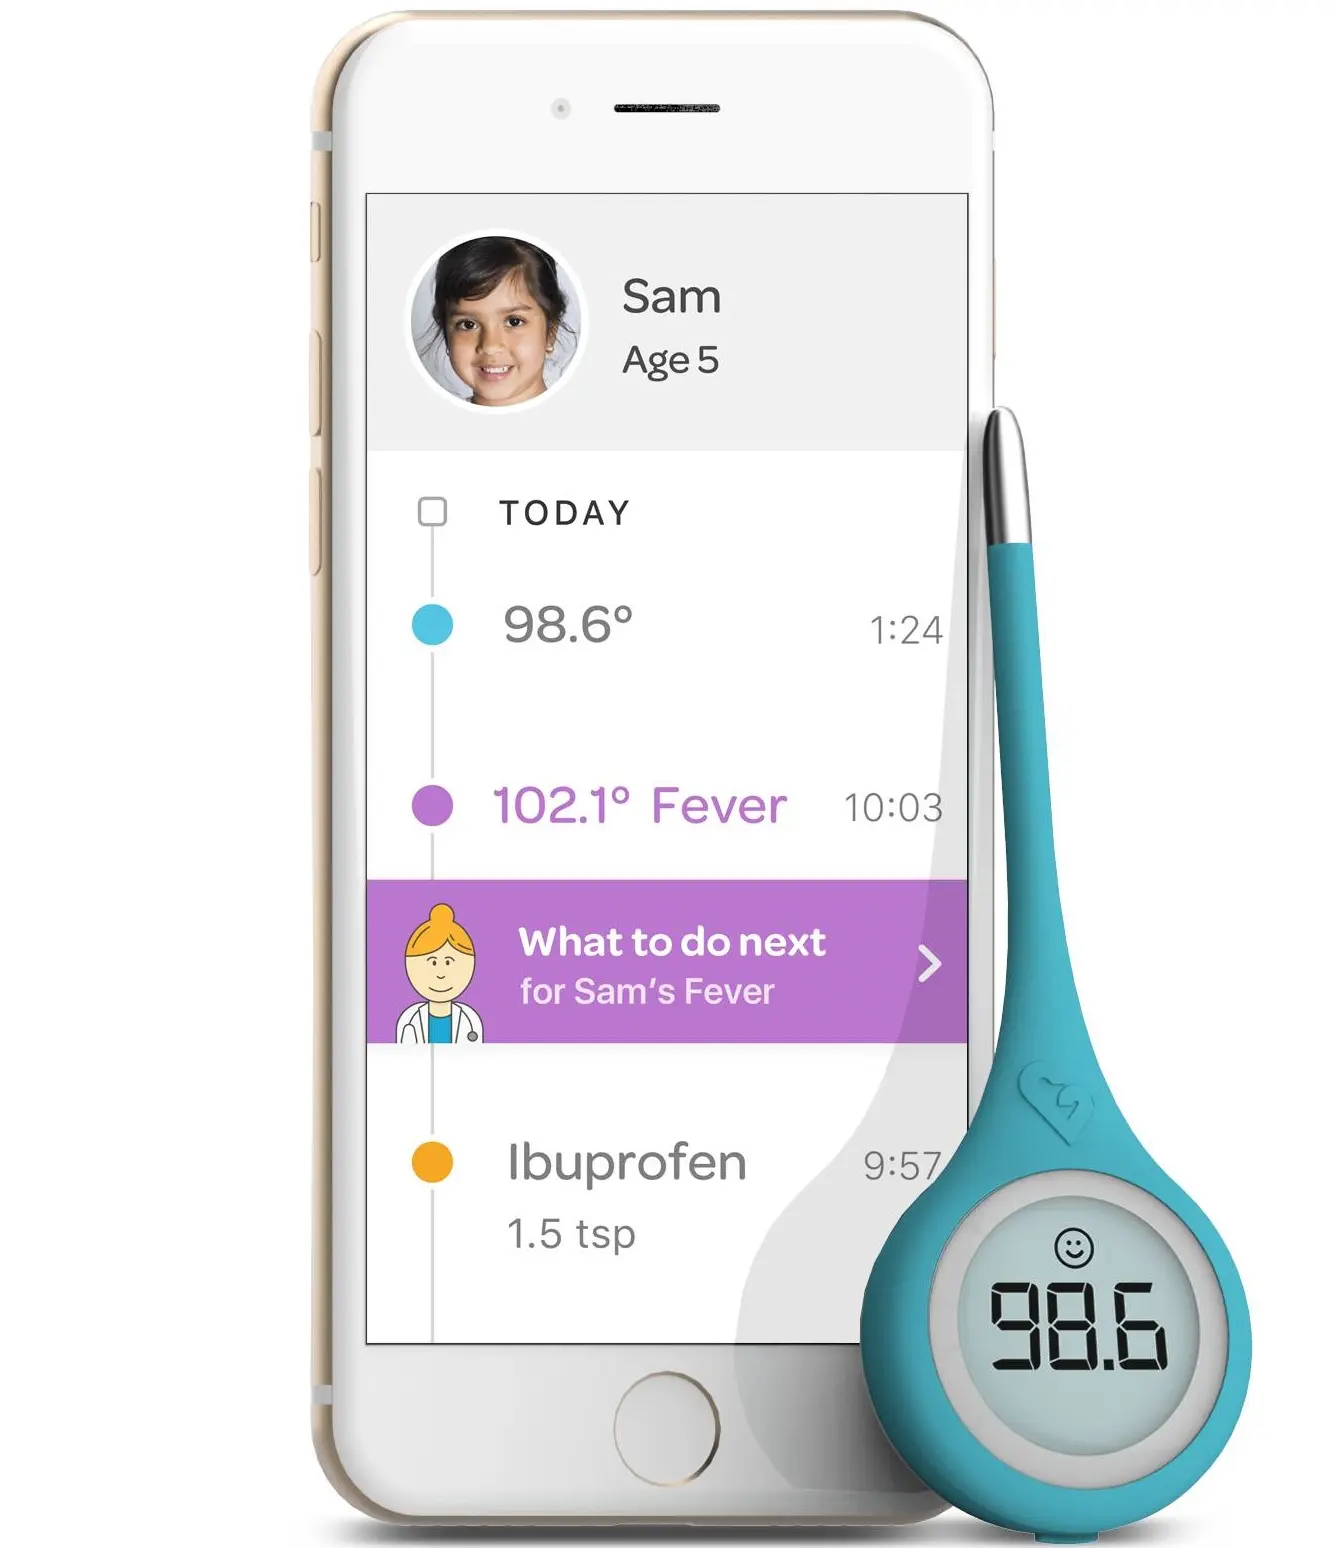 Digital thermometer next to a smartphone showing the FLUency interface. Interface shows timeline of temperature readings. For reading of 102.1 Fever, a button says "What to do next". The timeline includes a dose of ibuprofen.